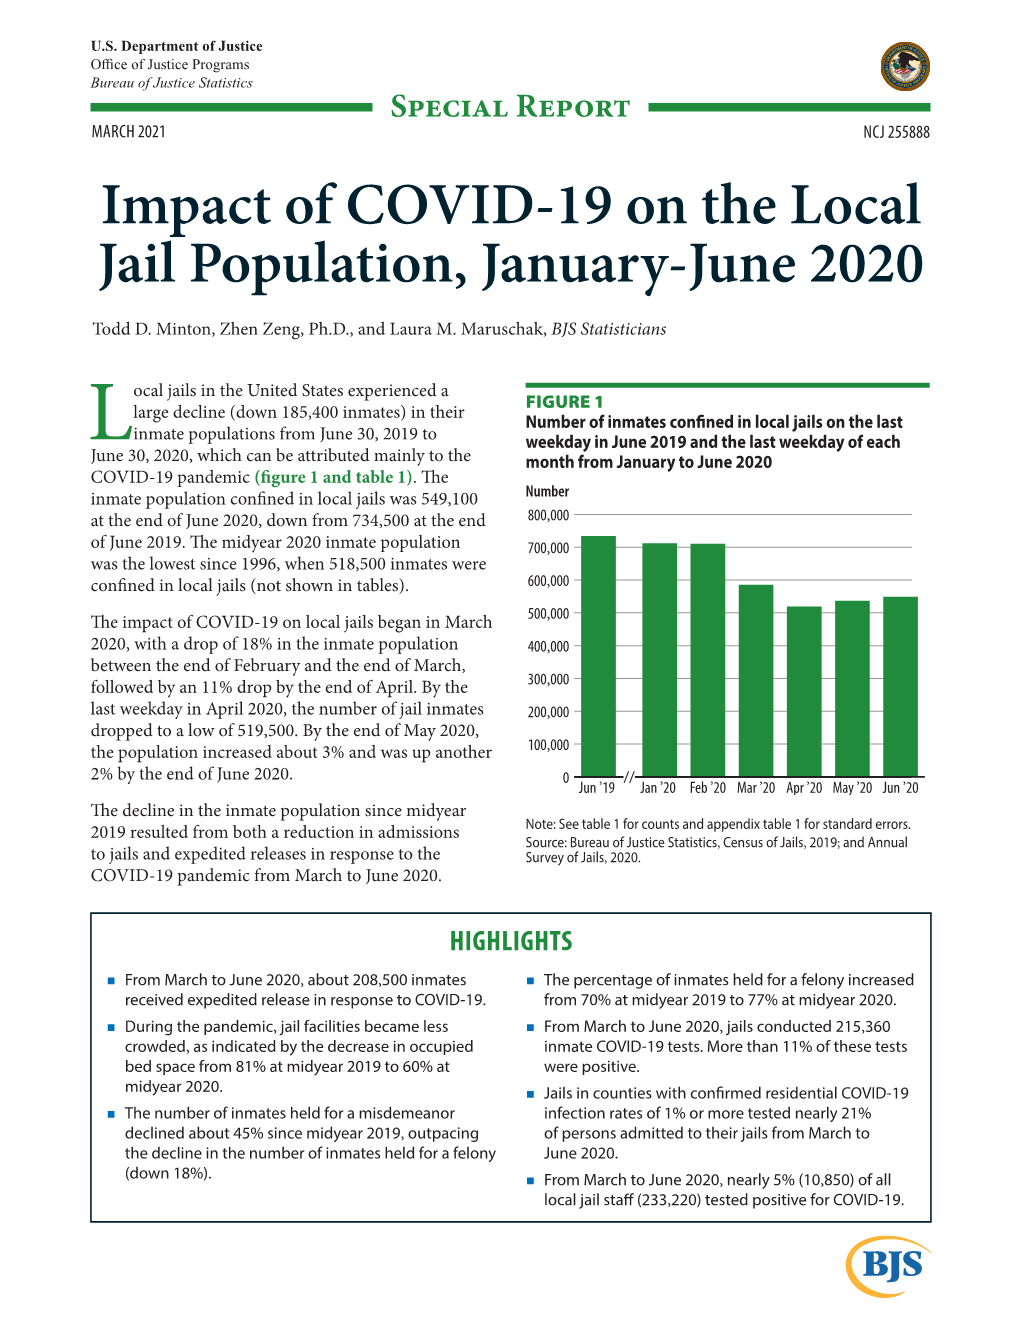 Impact of COVID-19 on the Local Jail Population, January-June 2020